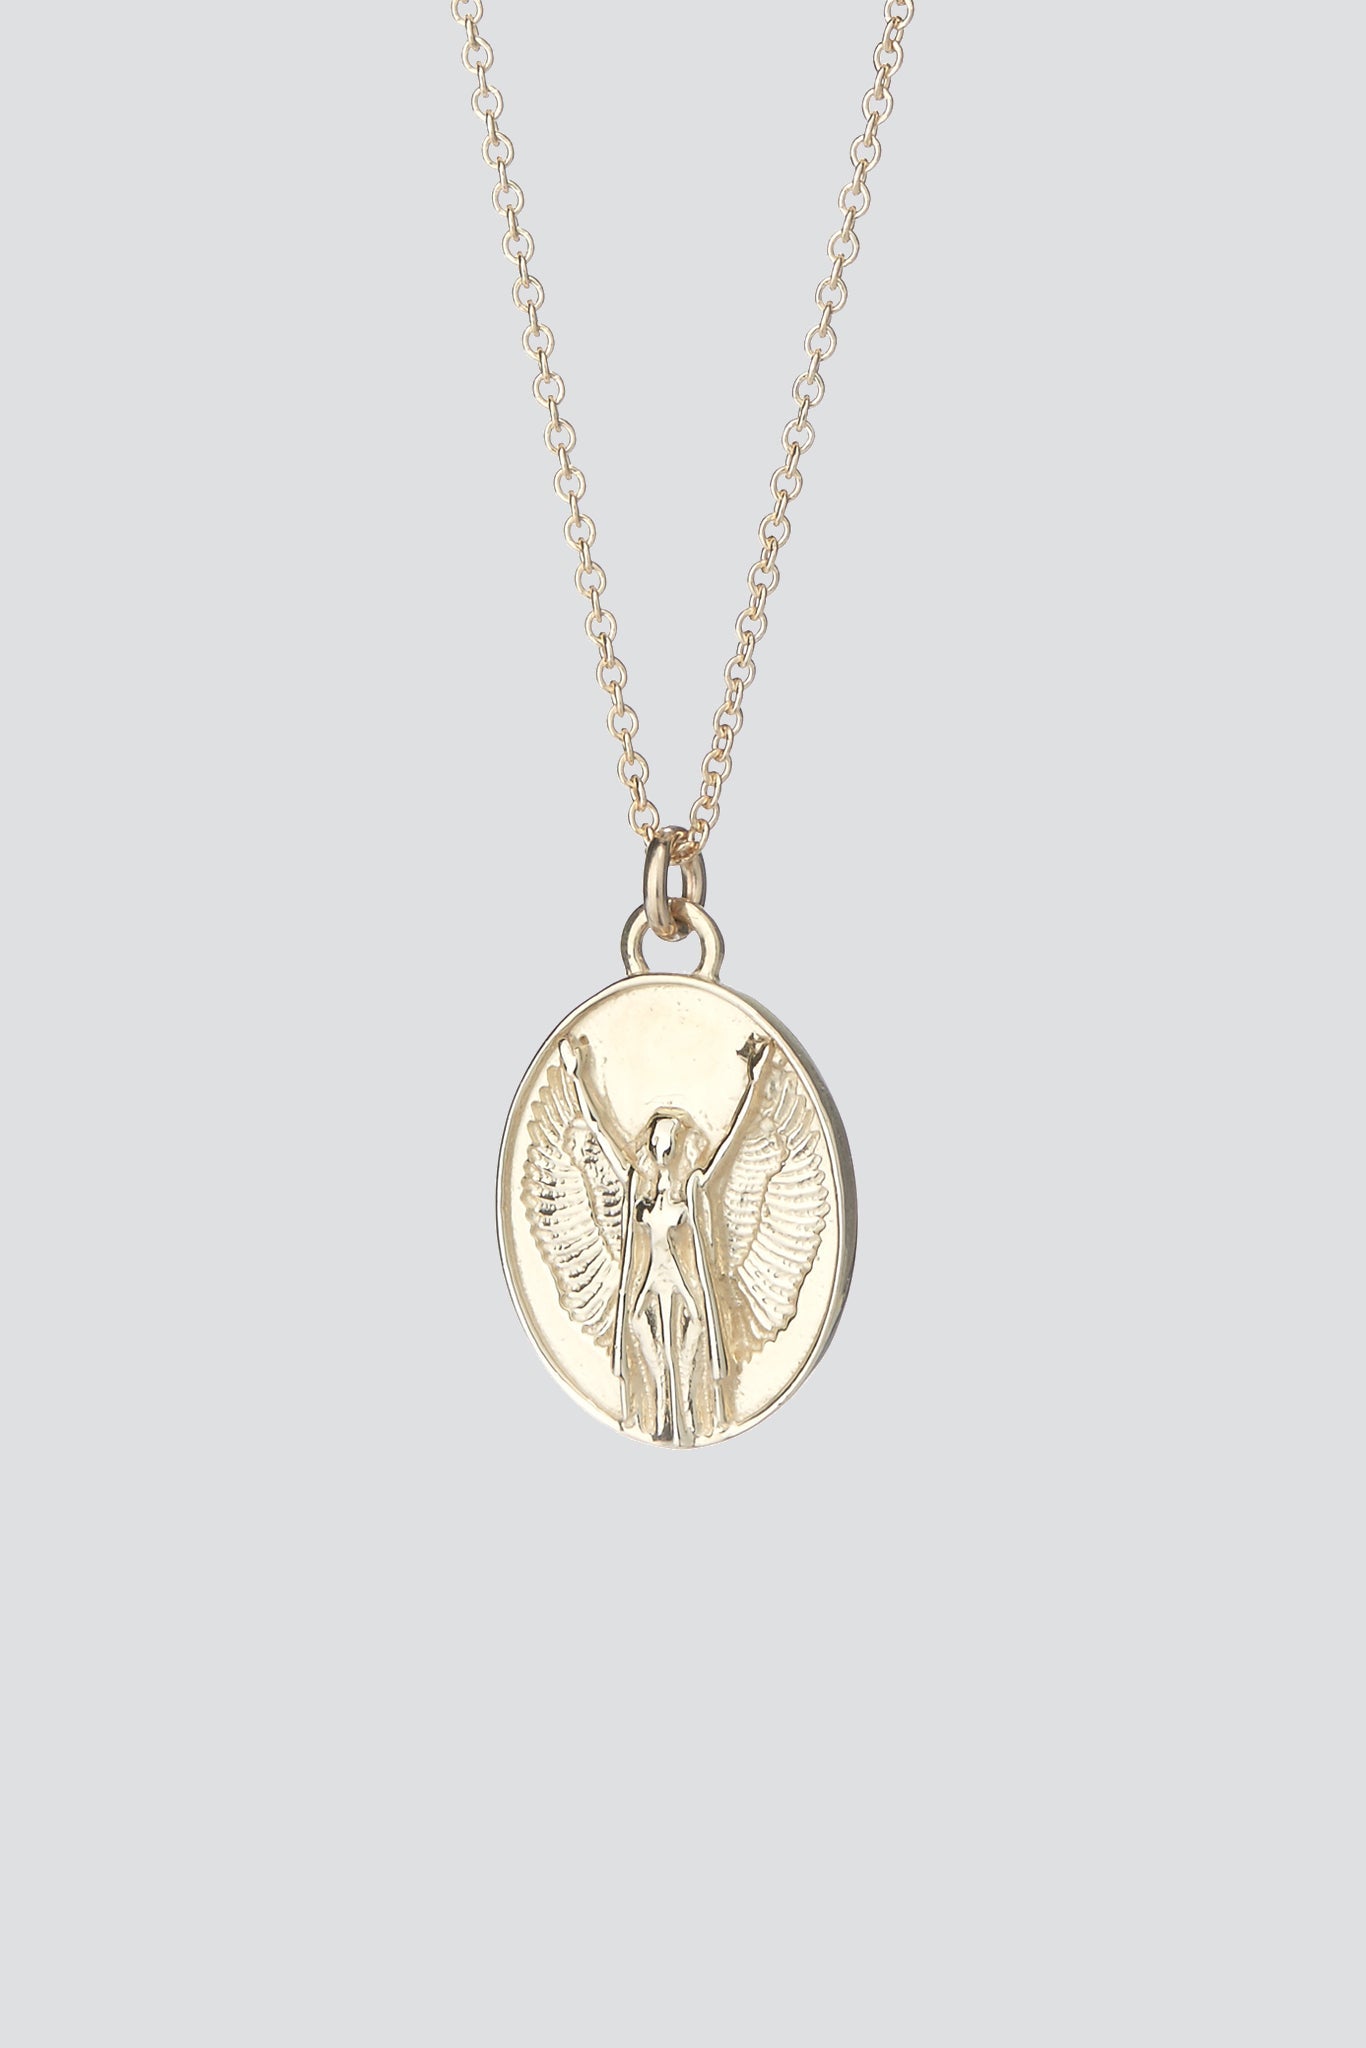 Buy 14k Gold Zodiac Virgo Necklace, Elegant Gold Virgo Sign Pendant is a  Great Gift for Her. Birthday Gift Online in India - Etsy